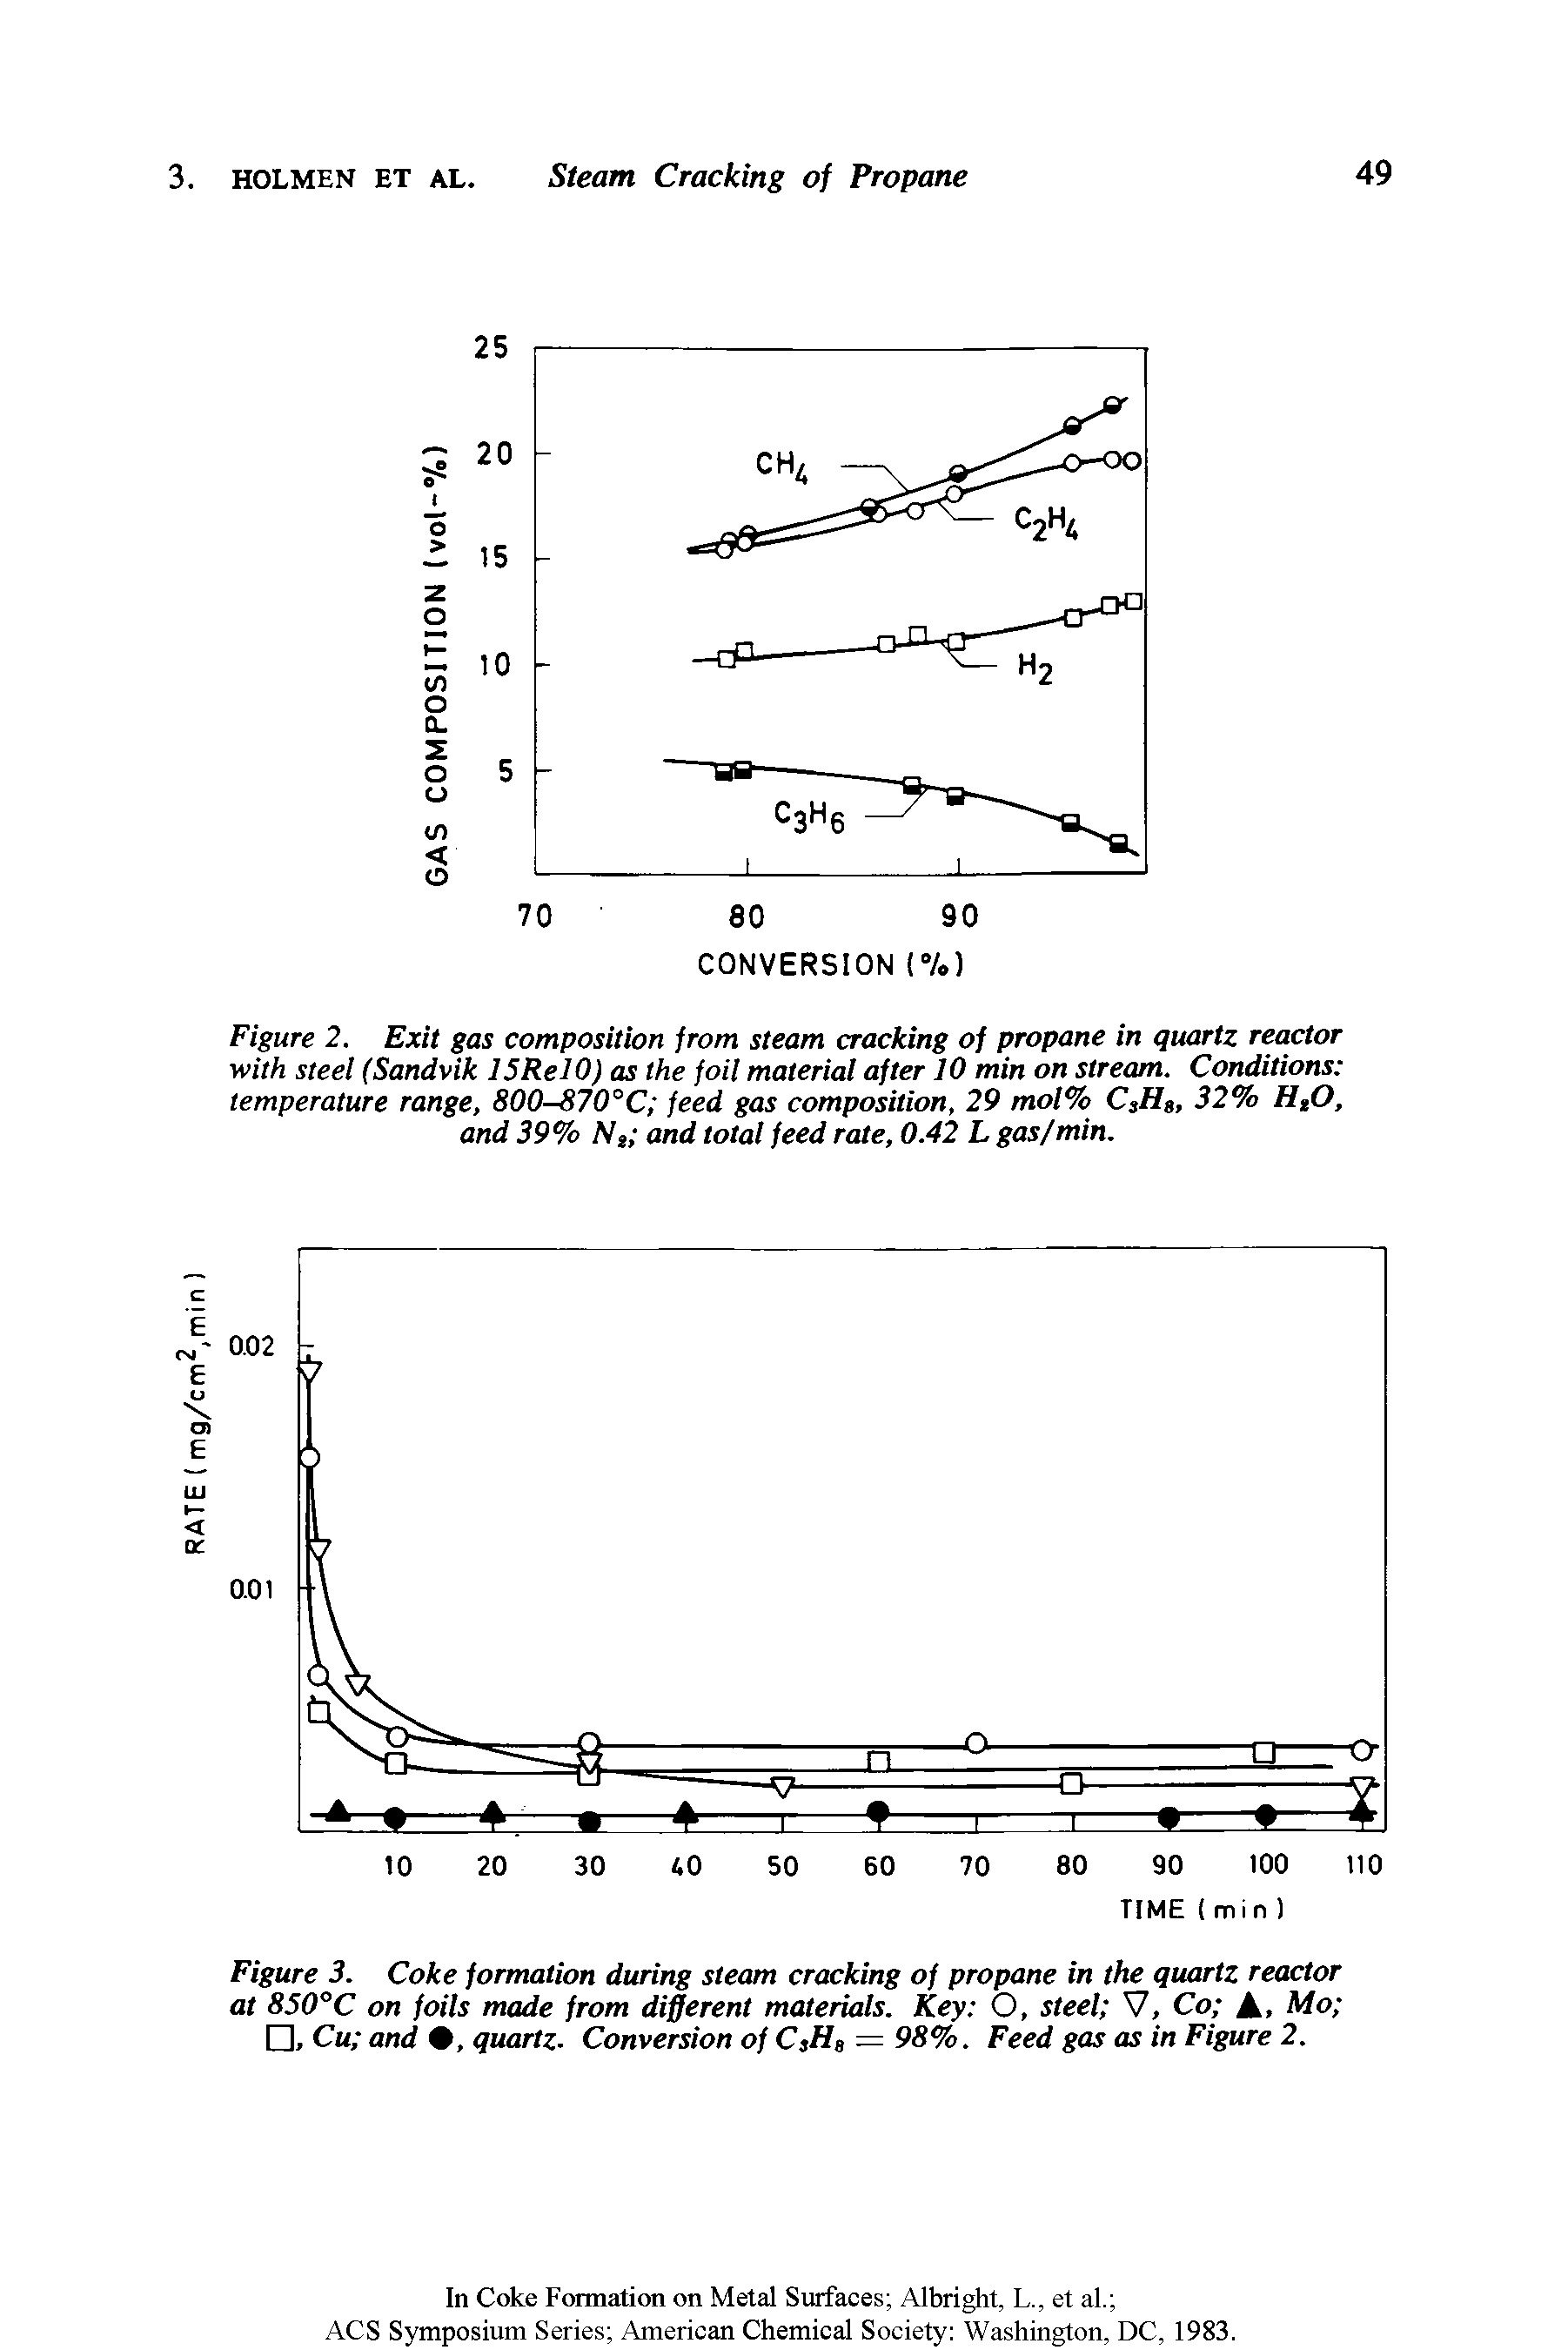 Figure 3. Coke formation during steam cracking of propane in the quartz reactor at 850°C on foils made from different materials. Key O, steel V, Co A. Mo , Cu and 0, quartz. Conversion of C3HB — 98%. Feed gas as in Figure 2.